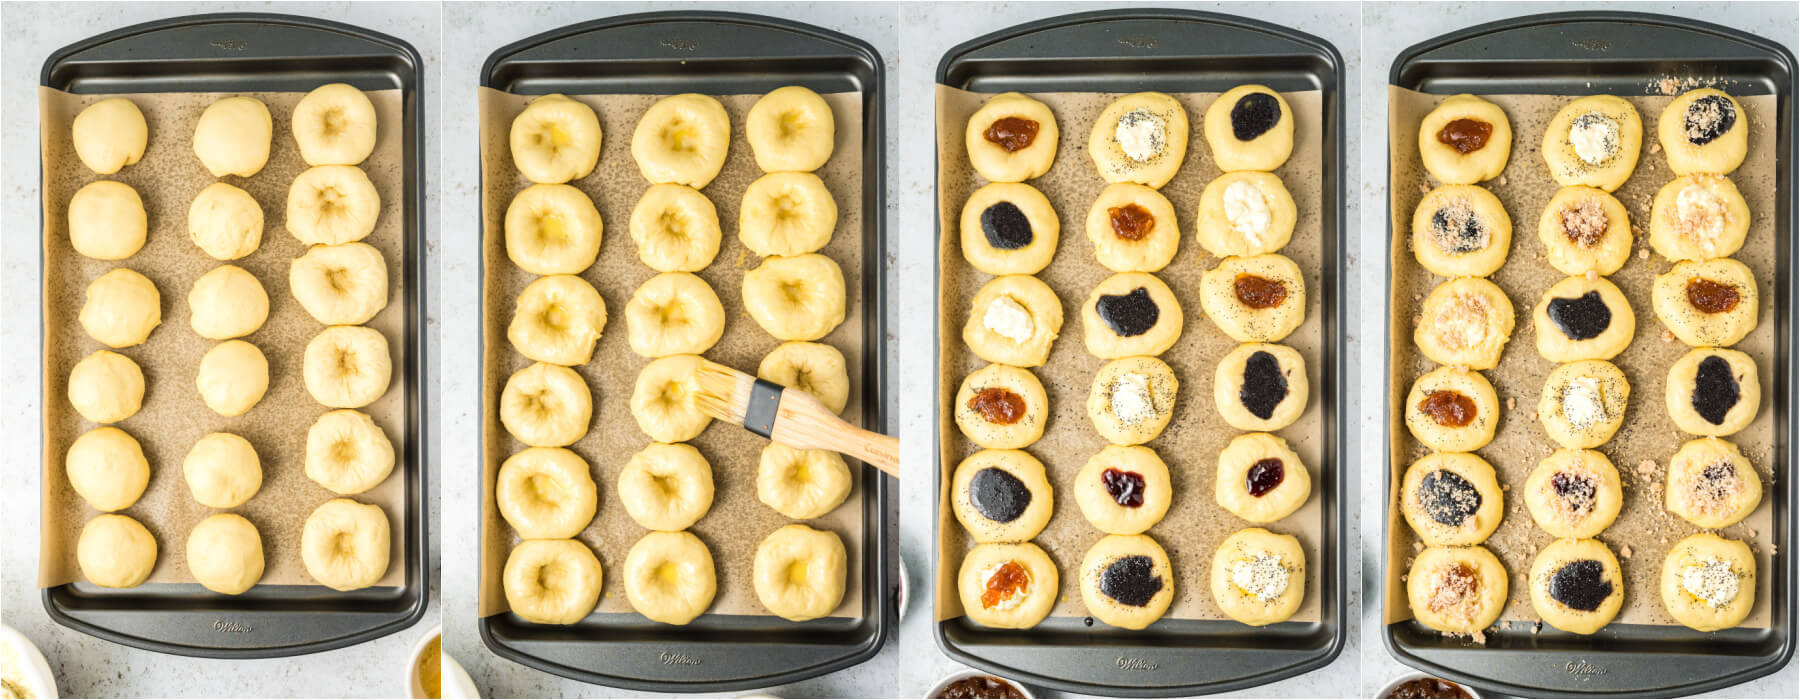 A series of process images showing how to fill and bake kolaches.